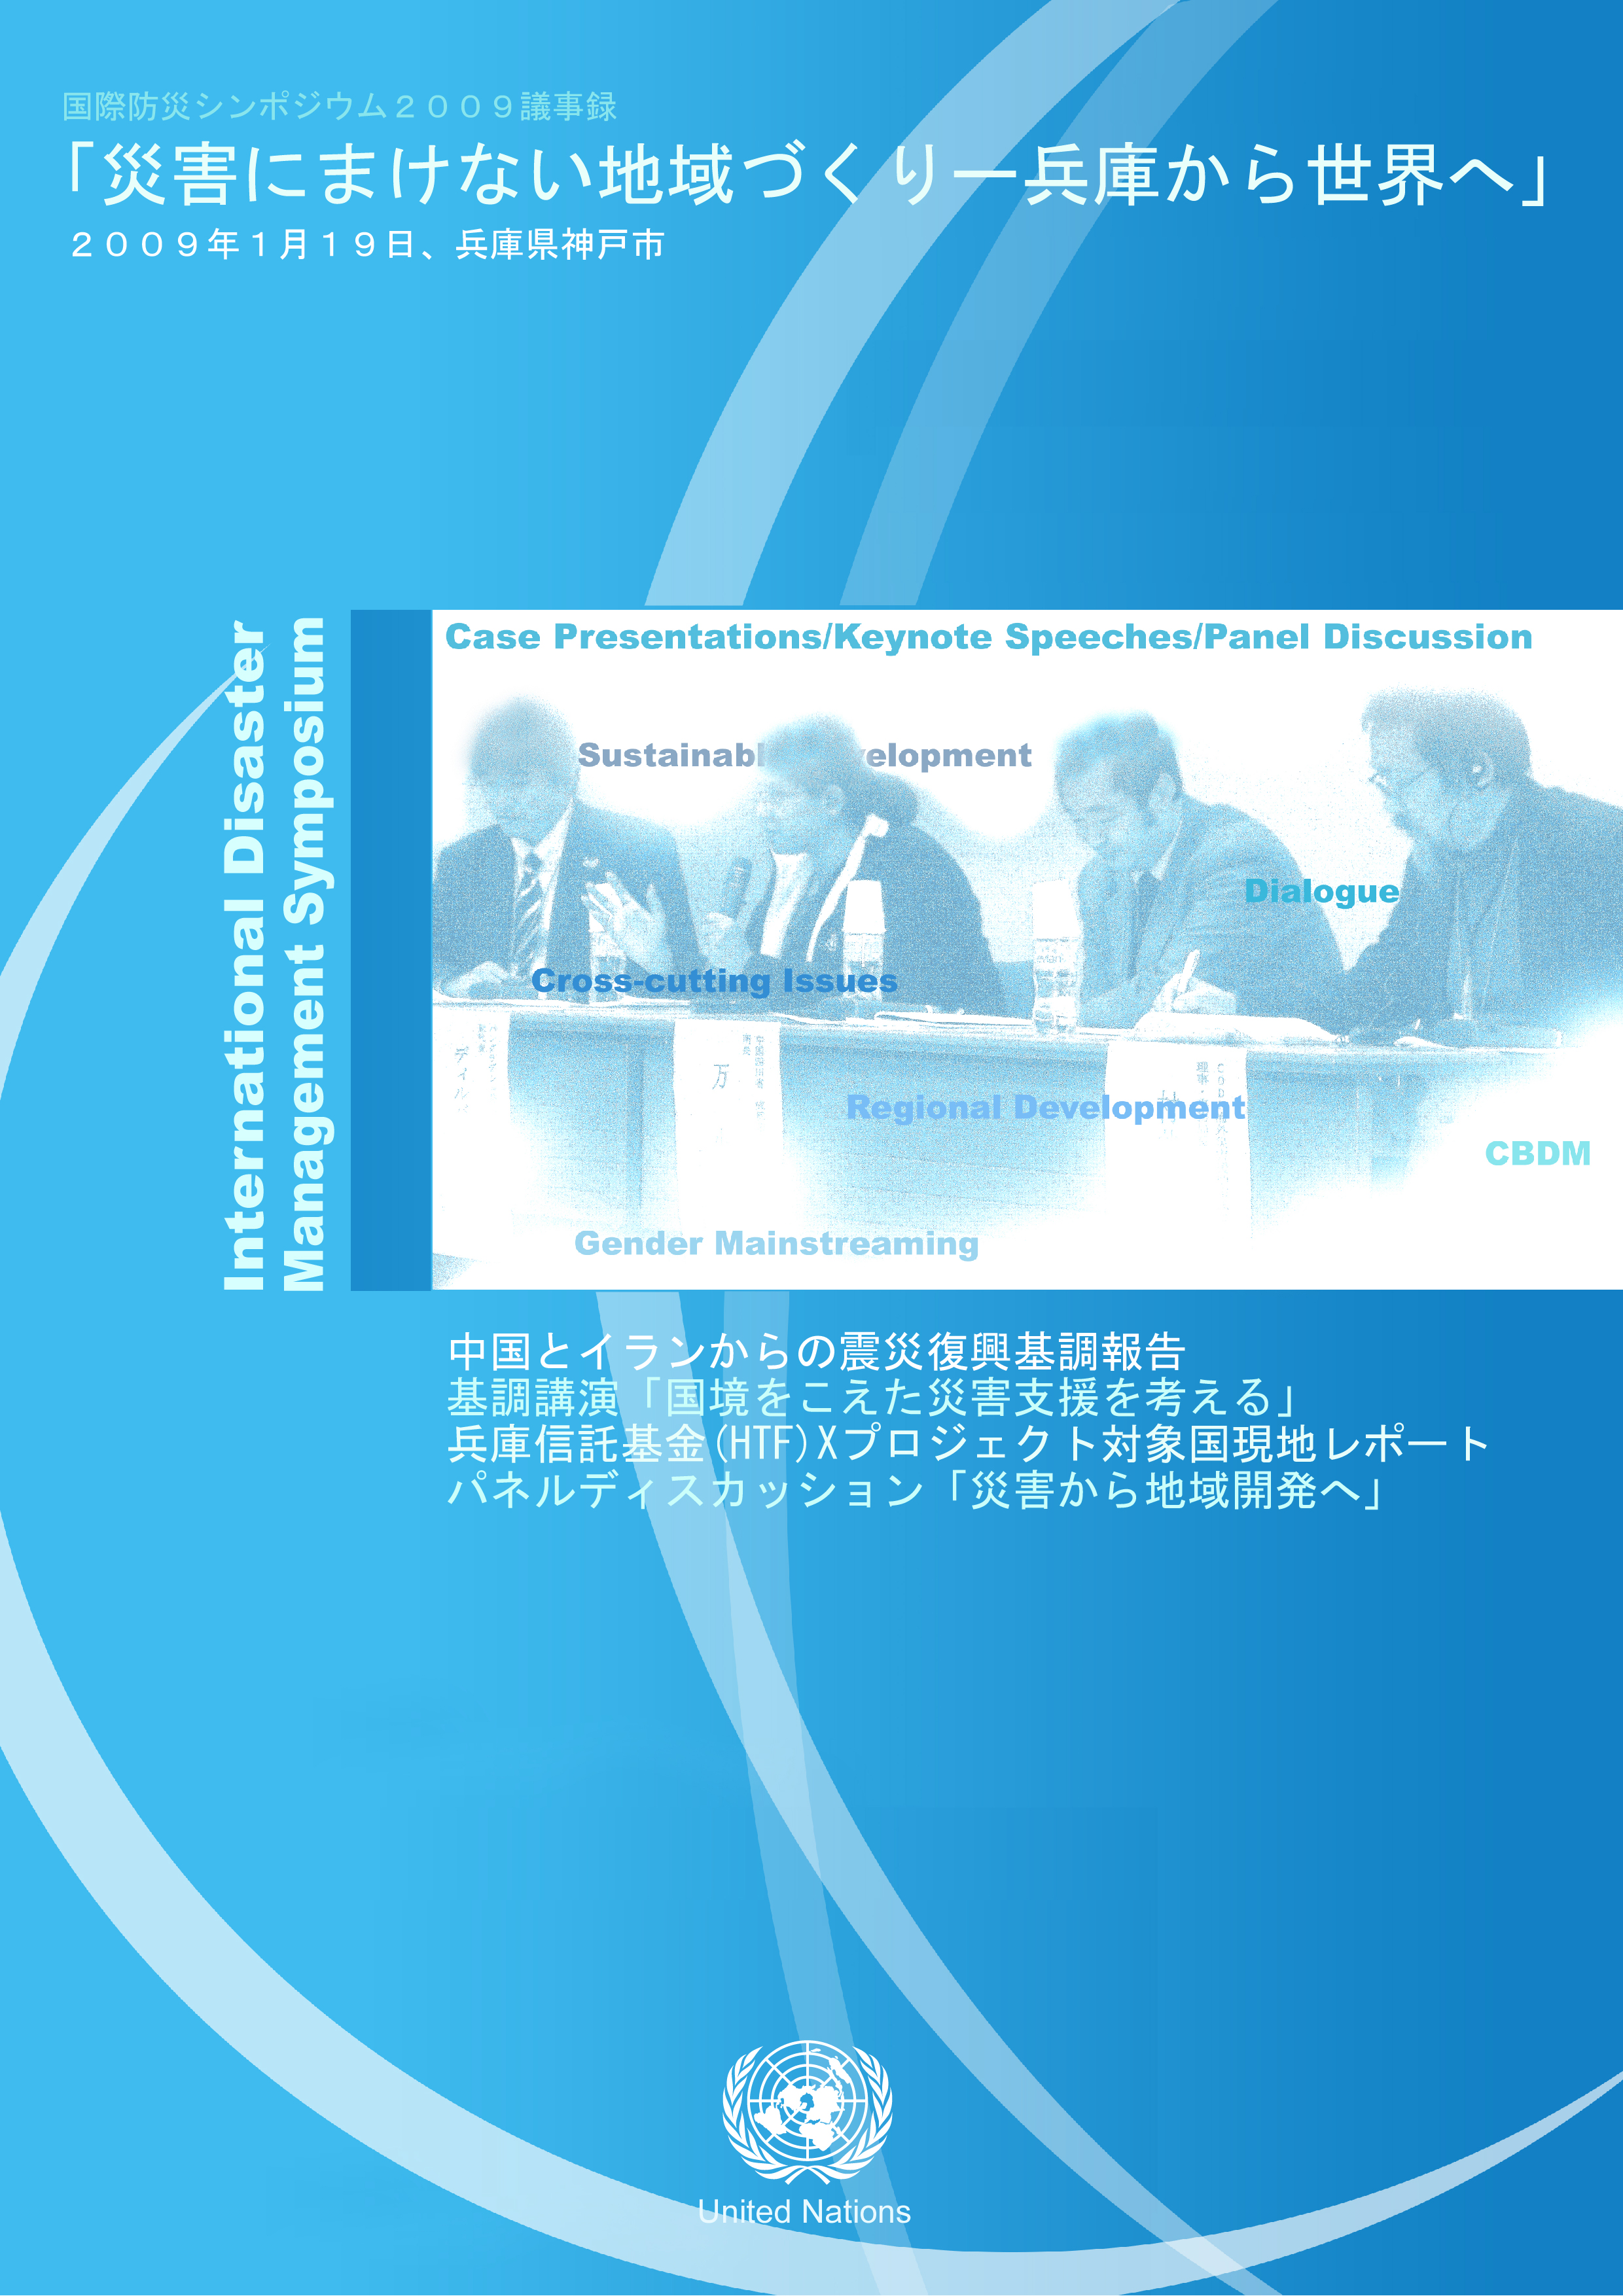 Cover of the proceedings of the international disaster management symposium 2009